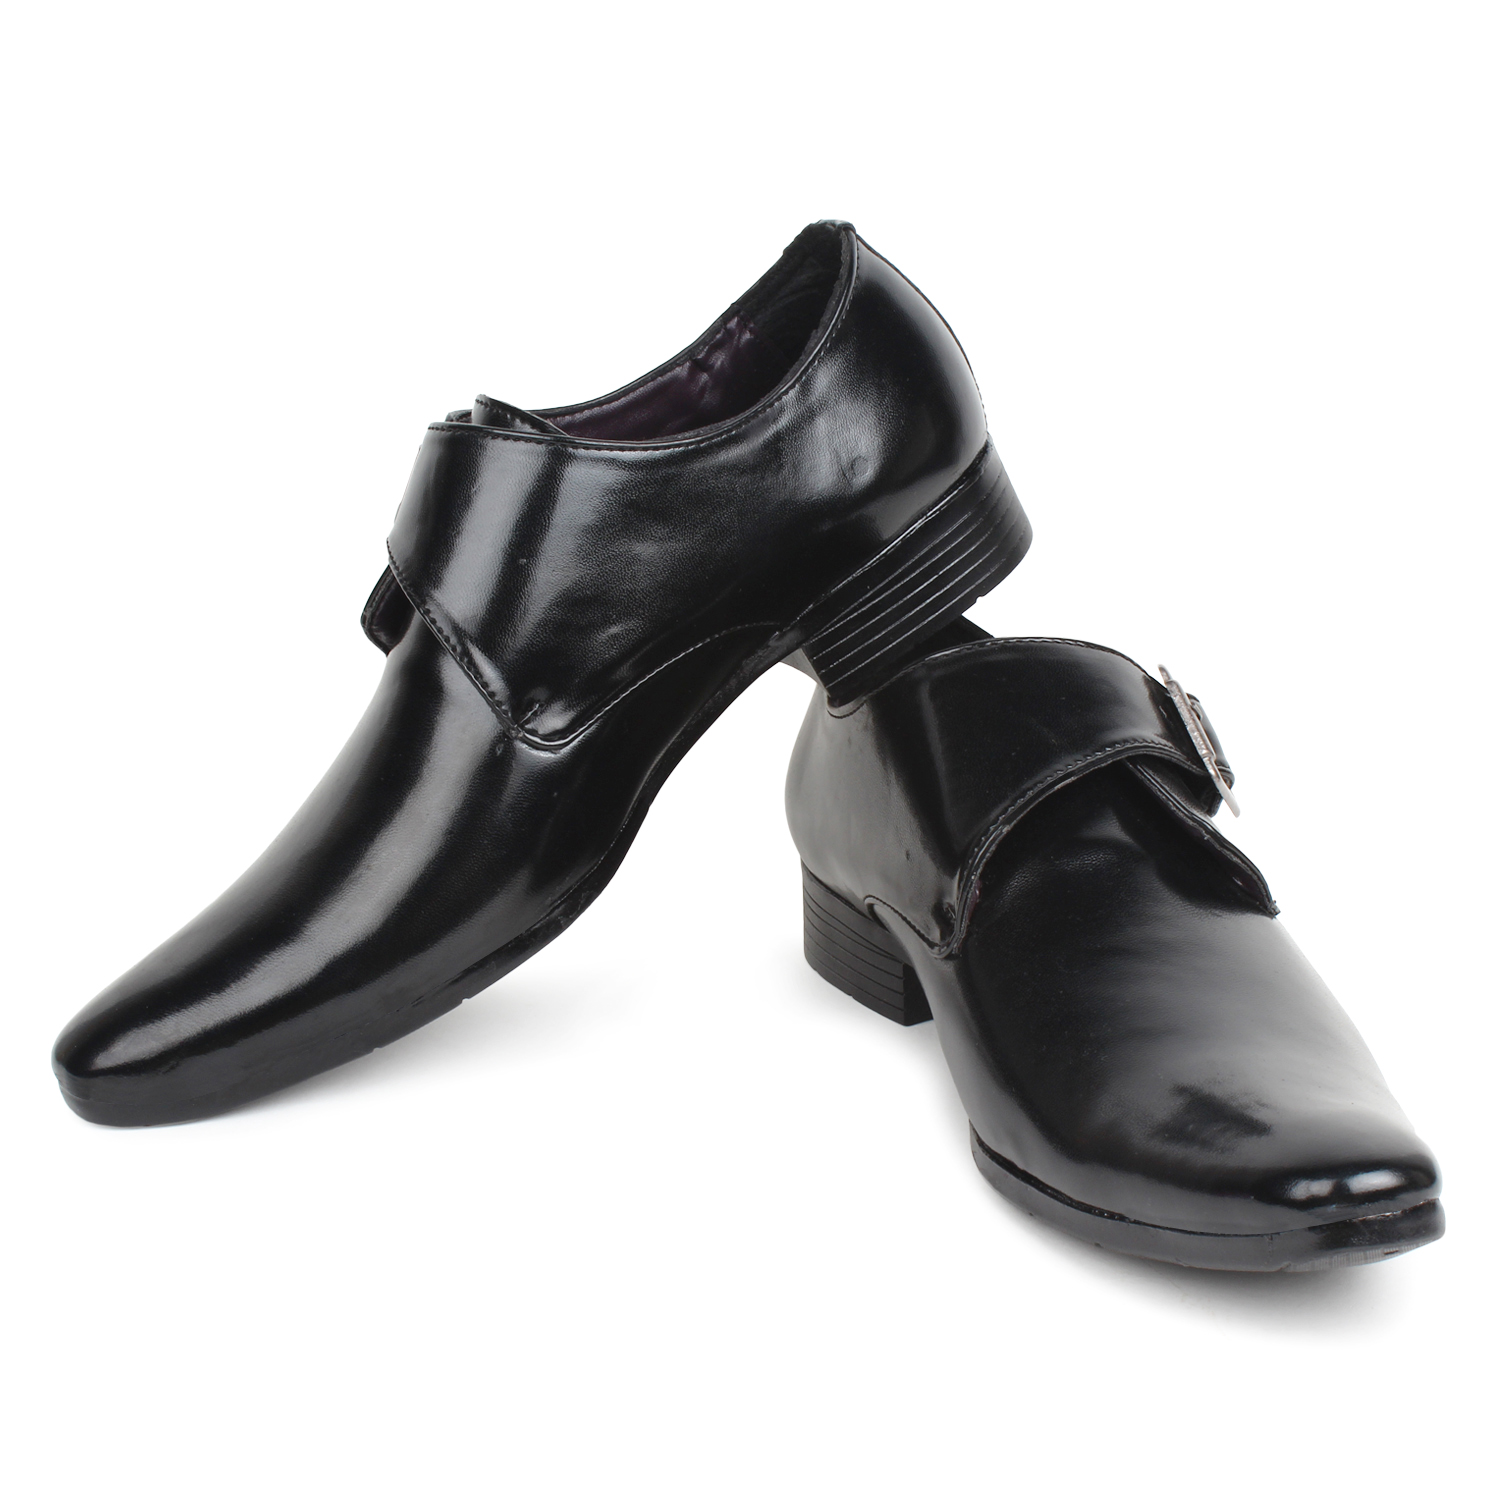 Buy Buwch Formal Black Shoes Online @ ₹499 from ShopClues